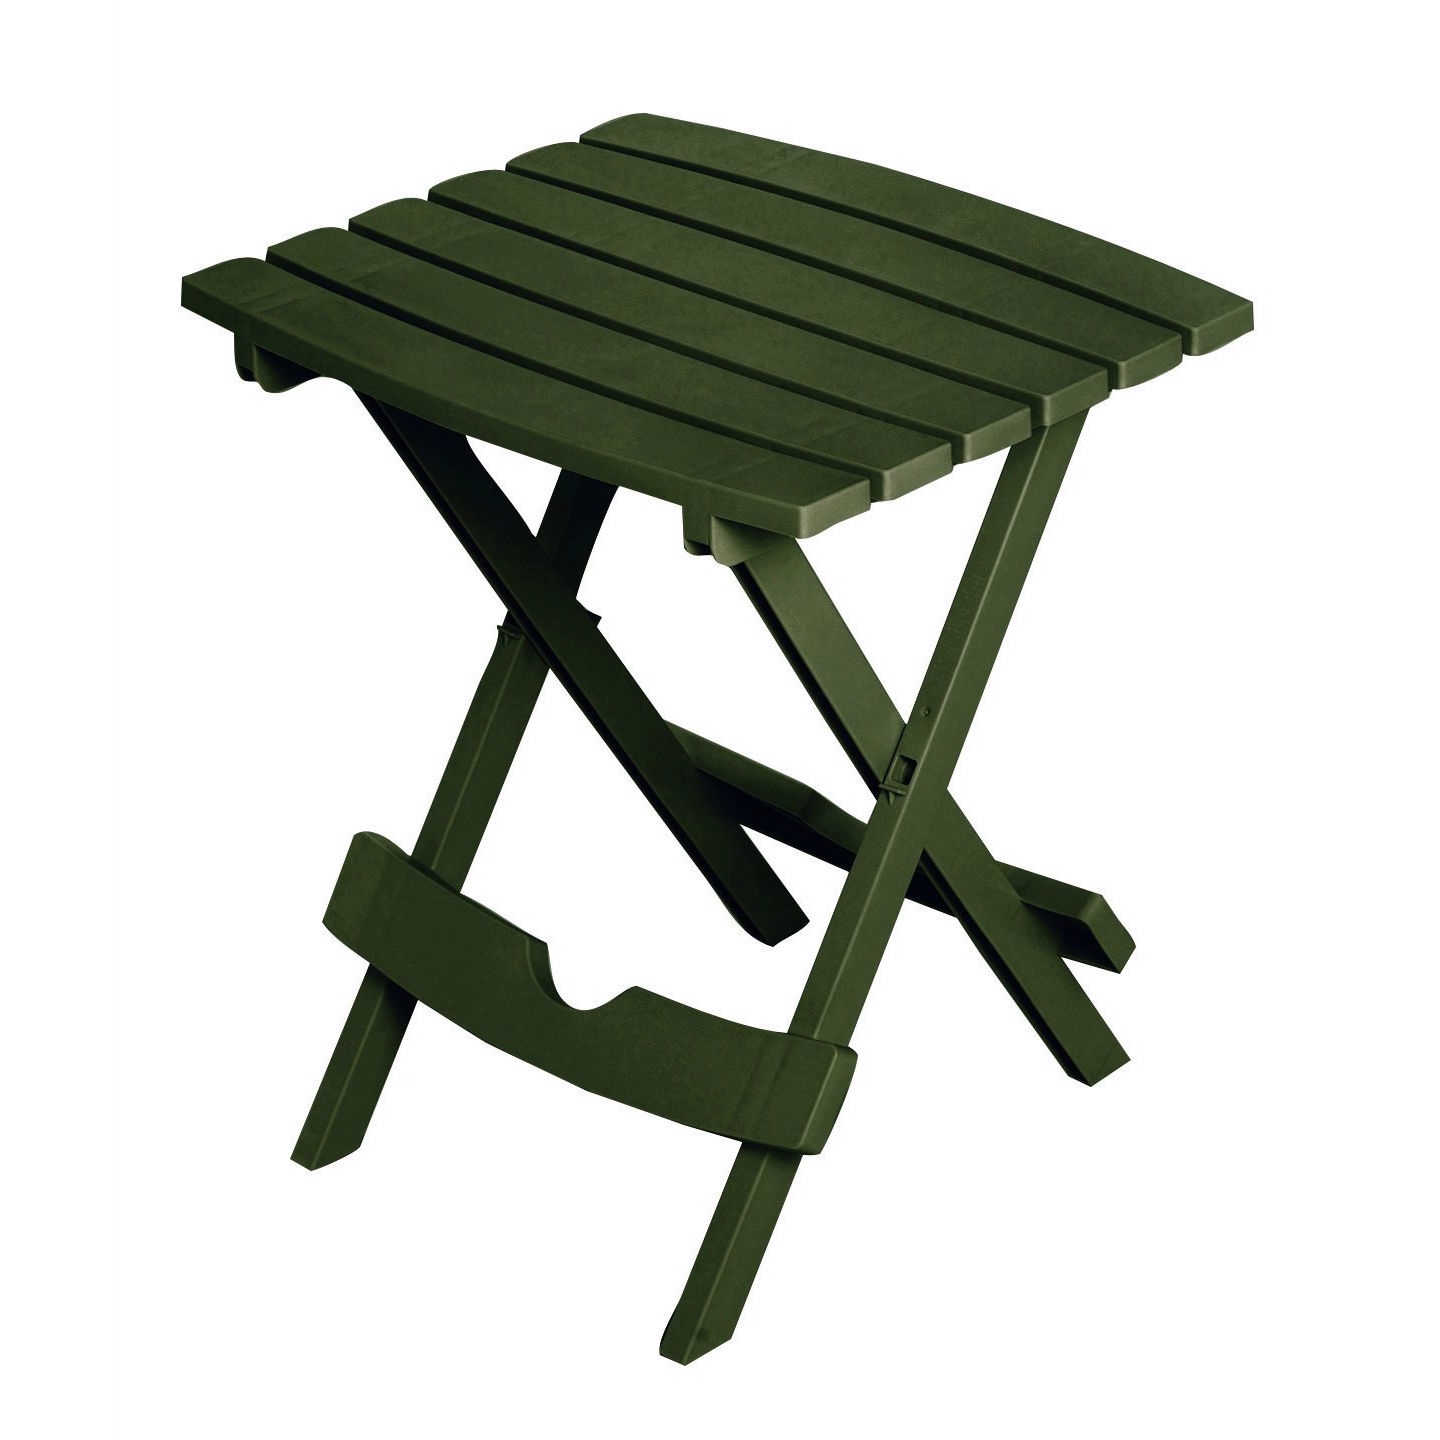 Folding Outdoor Side Table in Earth Brown Durable Plastic Resin